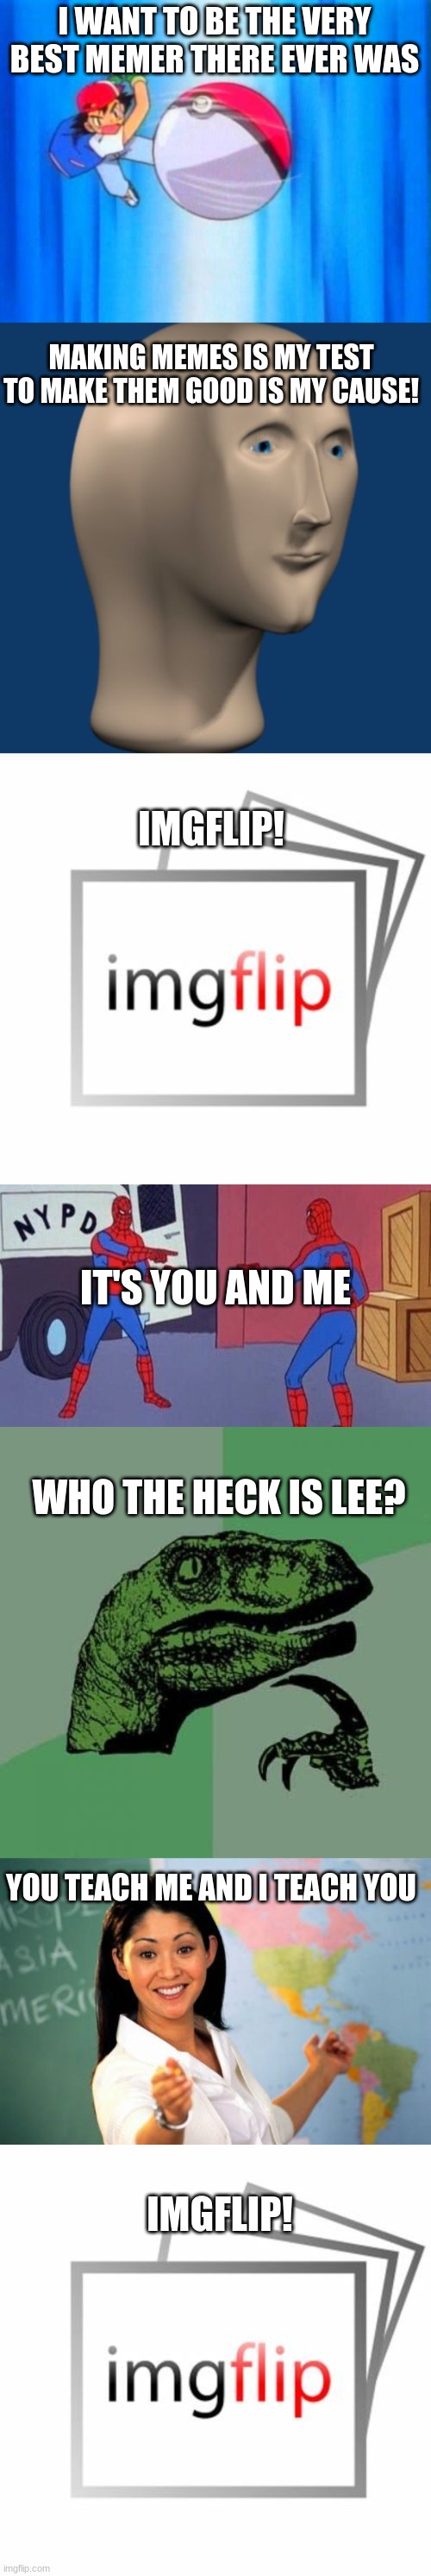 imgflip theme song | I WANT TO BE THE VERY BEST MEMER THERE EVER WAS; MAKING MEMES IS MY TEST TO MAKE THEM GOOD IS MY CAUSE! IMGFLIP! IT'S YOU AND ME; WHO THE HECK IS LEE? YOU TEACH ME AND I TEACH YOU; IMGFLIP! | image tagged in i choose you,meme man,imgflip,spiderman pointing at spiderman,memes,philosoraptor | made w/ Imgflip meme maker